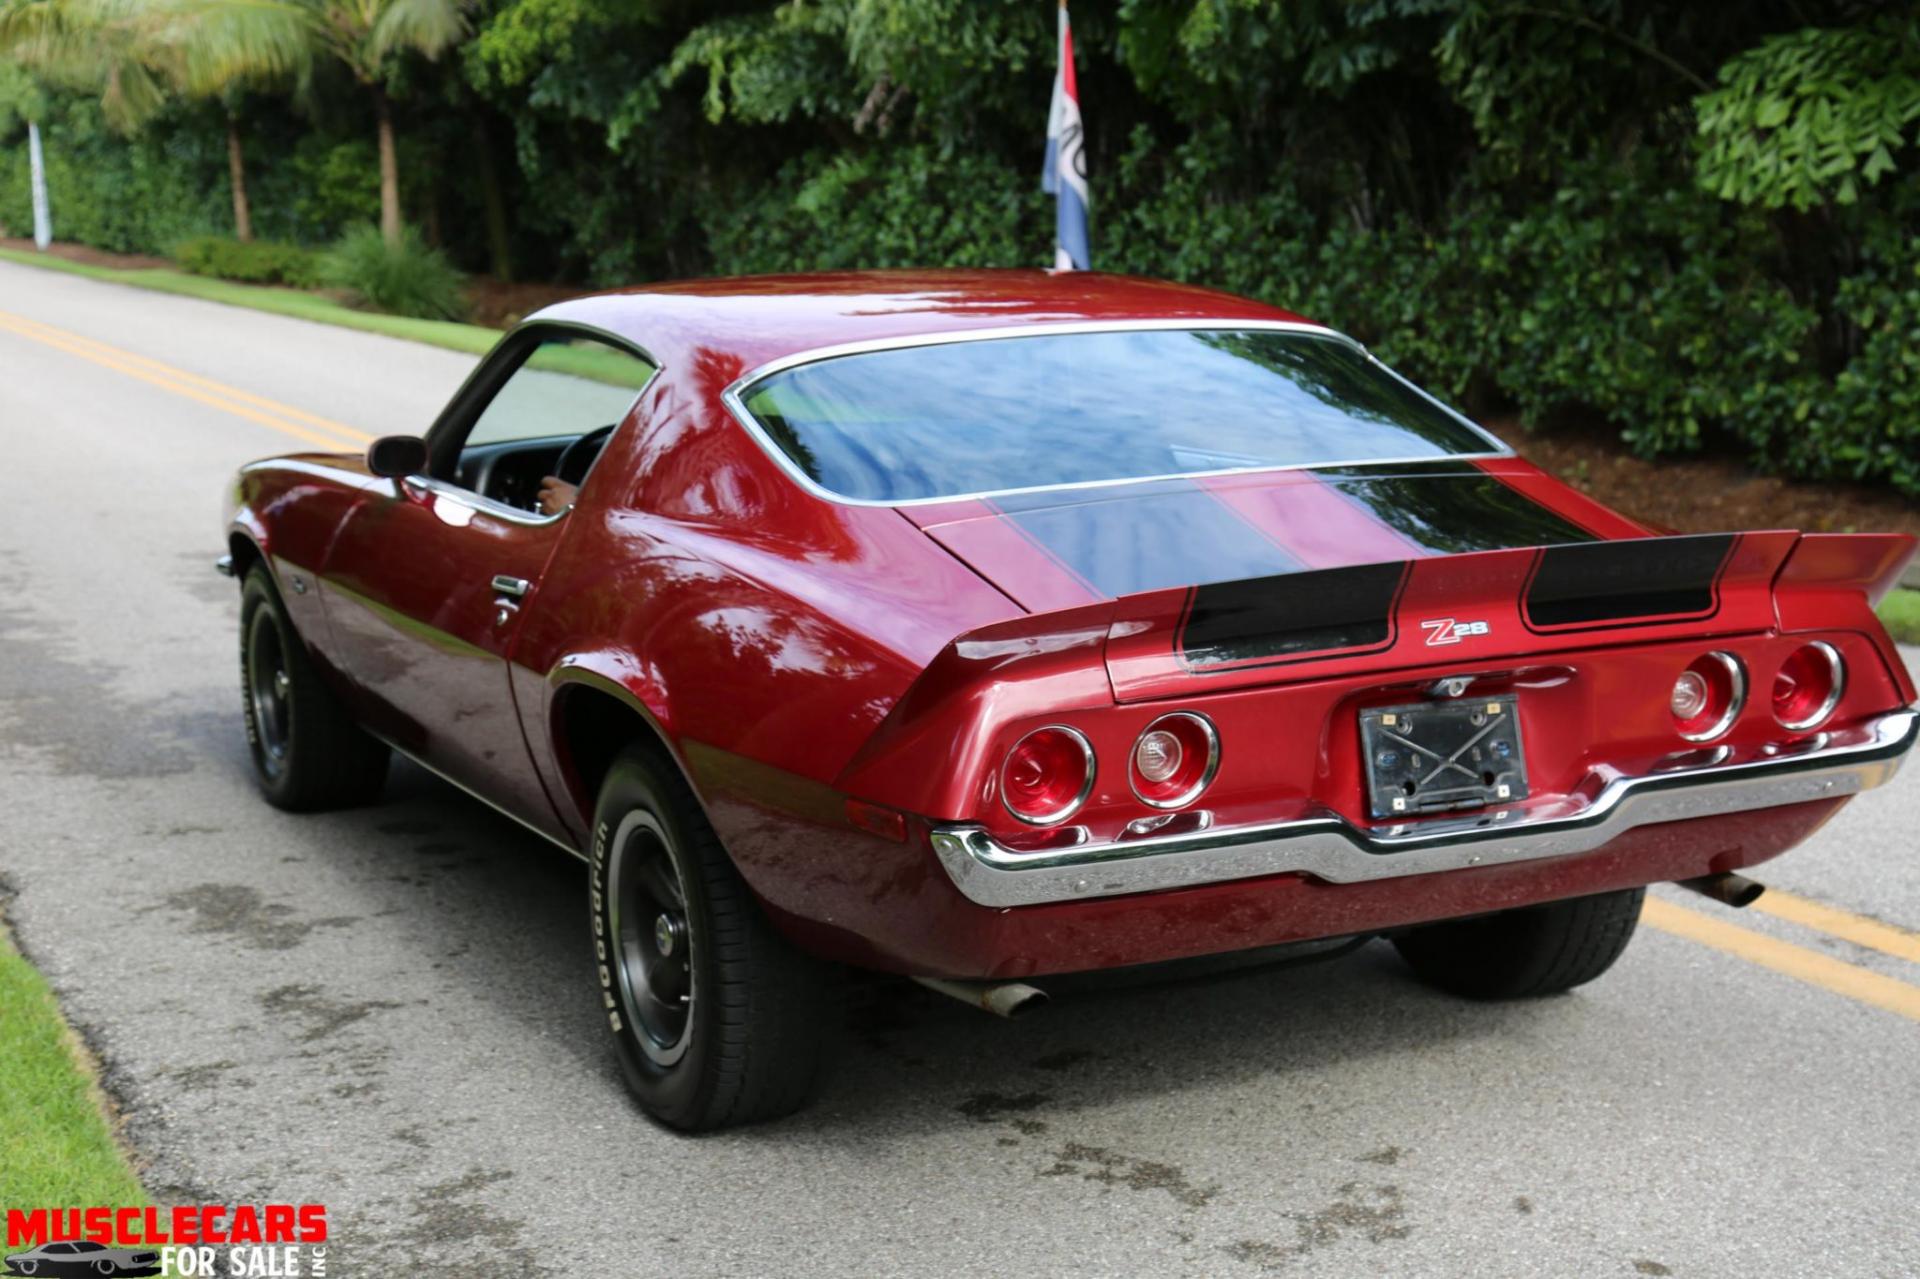 Used 1973 Chevrolet Camaro Z/28 For Sale ($25,000) | Muscle Cars for Sale  Inc. Stock #1063